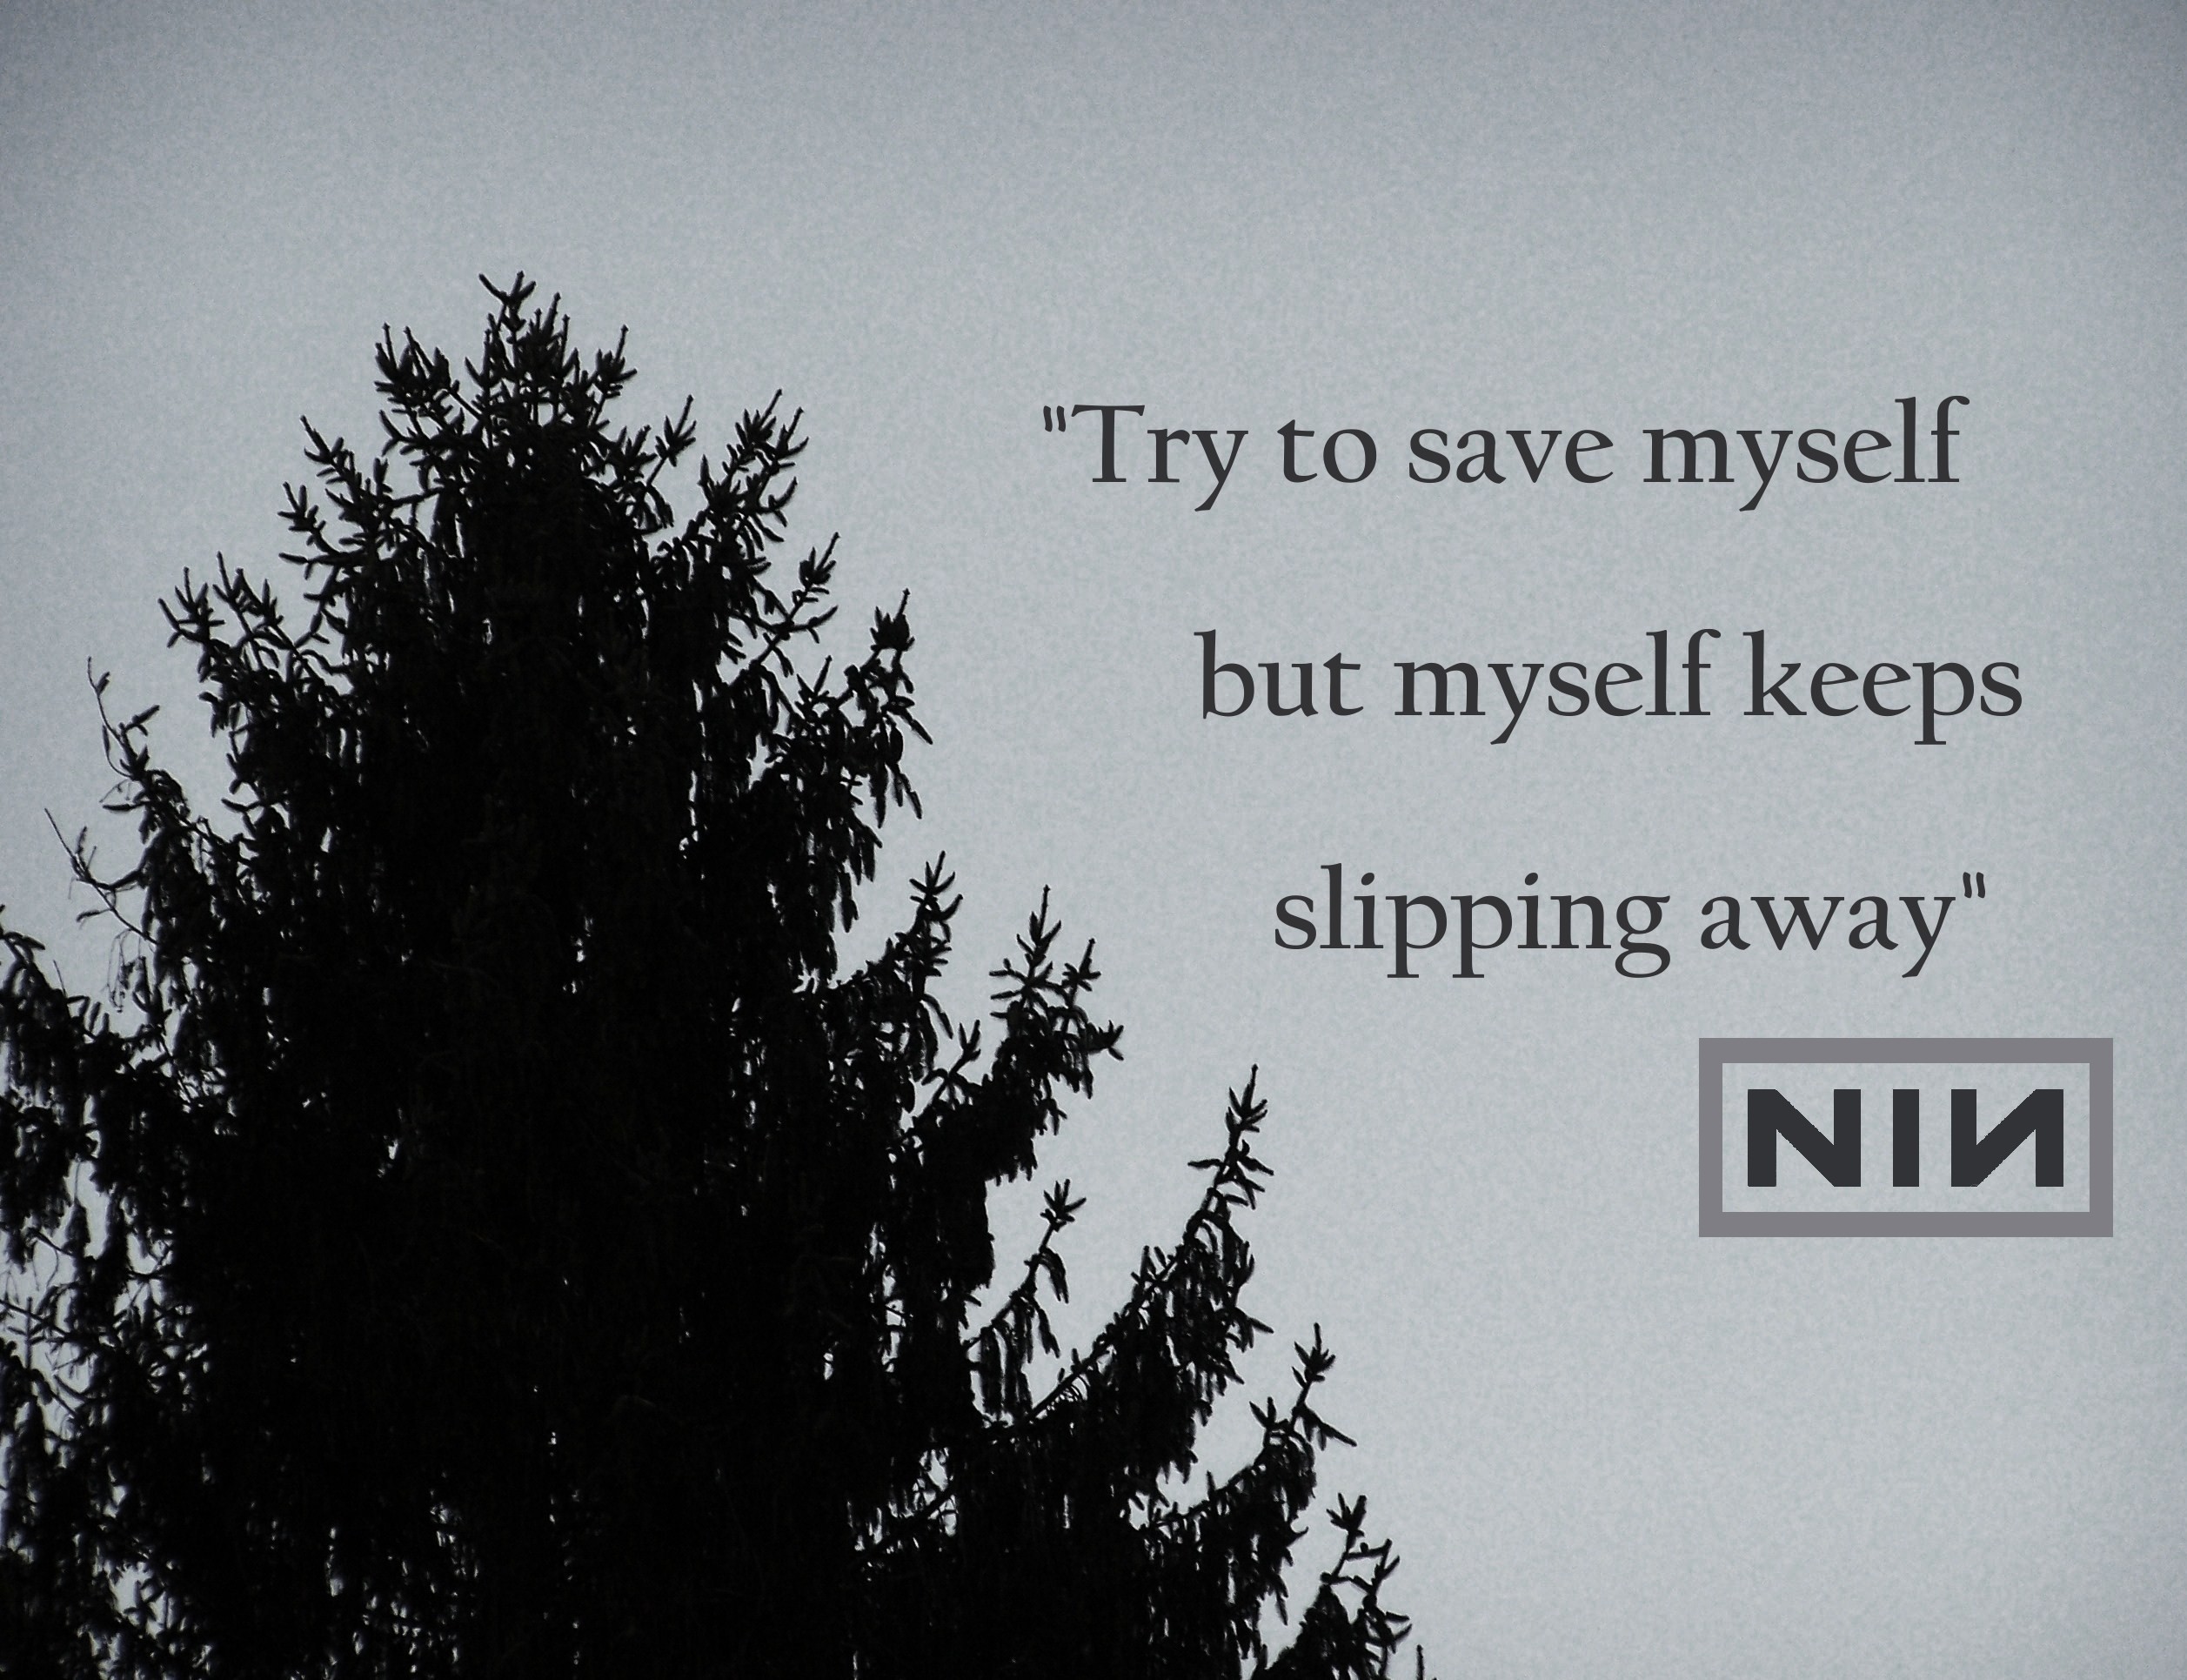 Nine Inch Nails - Nine Inch Nails Song Quotes - HD Wallpaper 